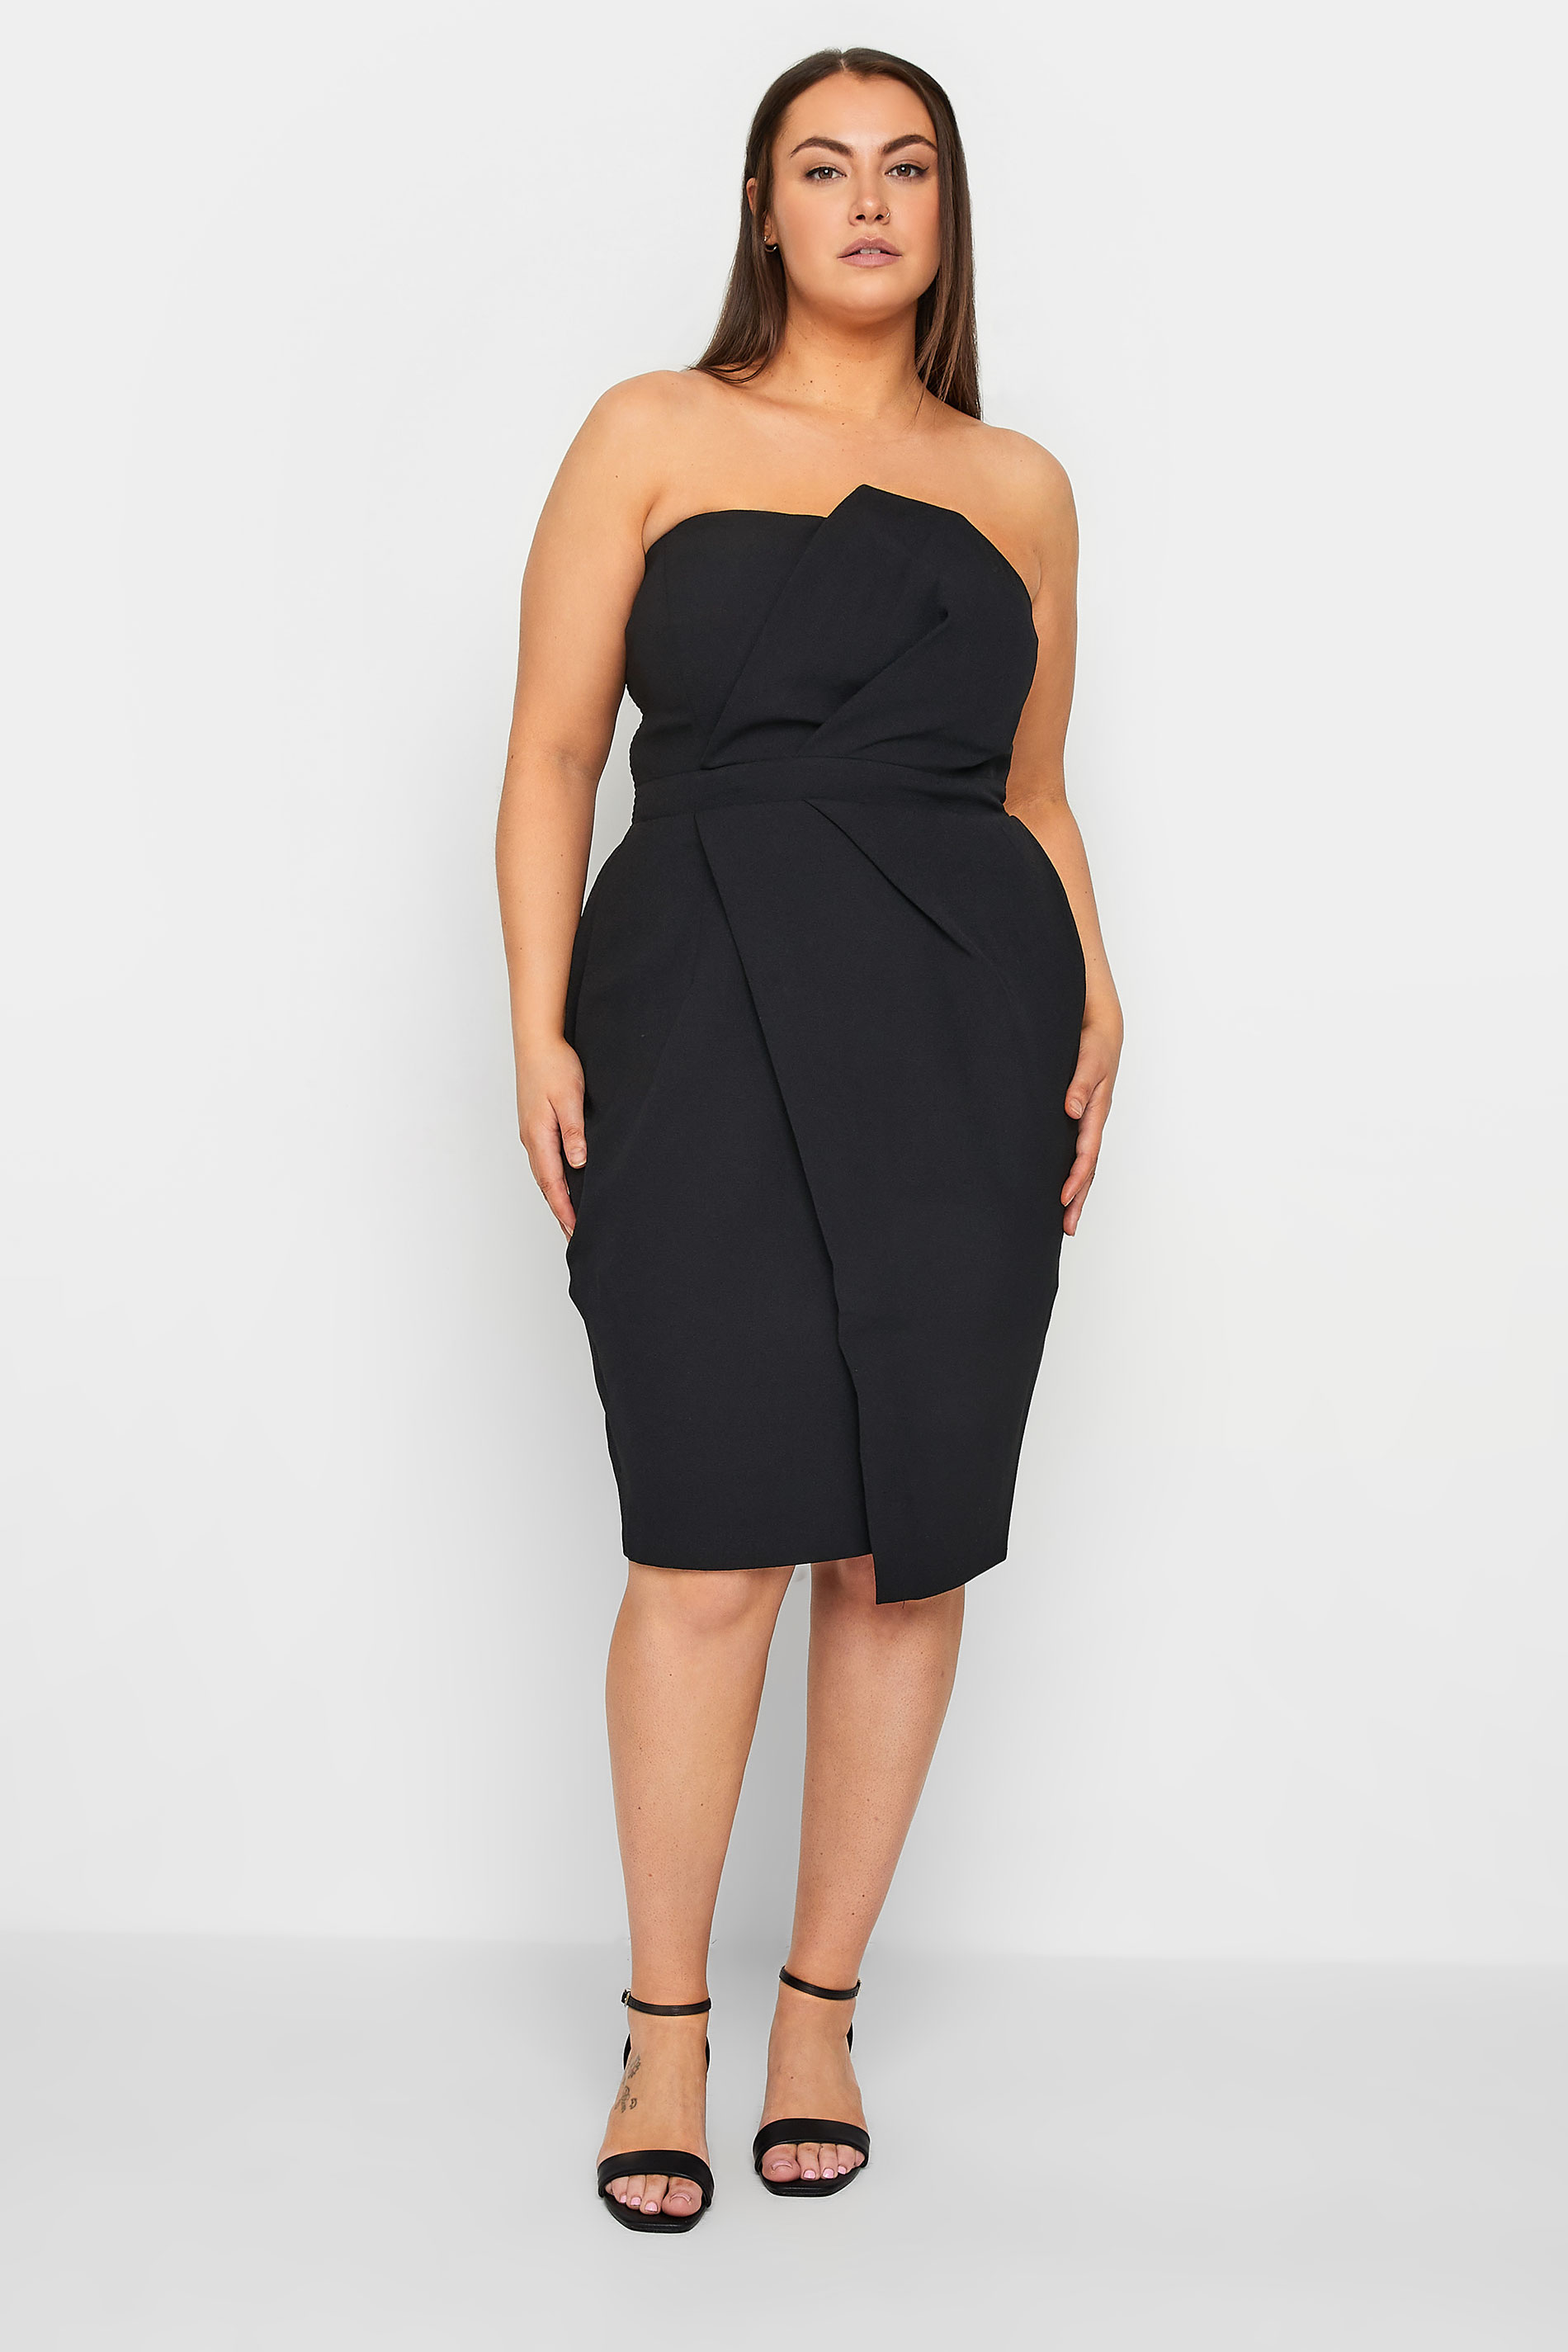 Evans Black Strapless Twisted Front Midi Body Con Dress 1